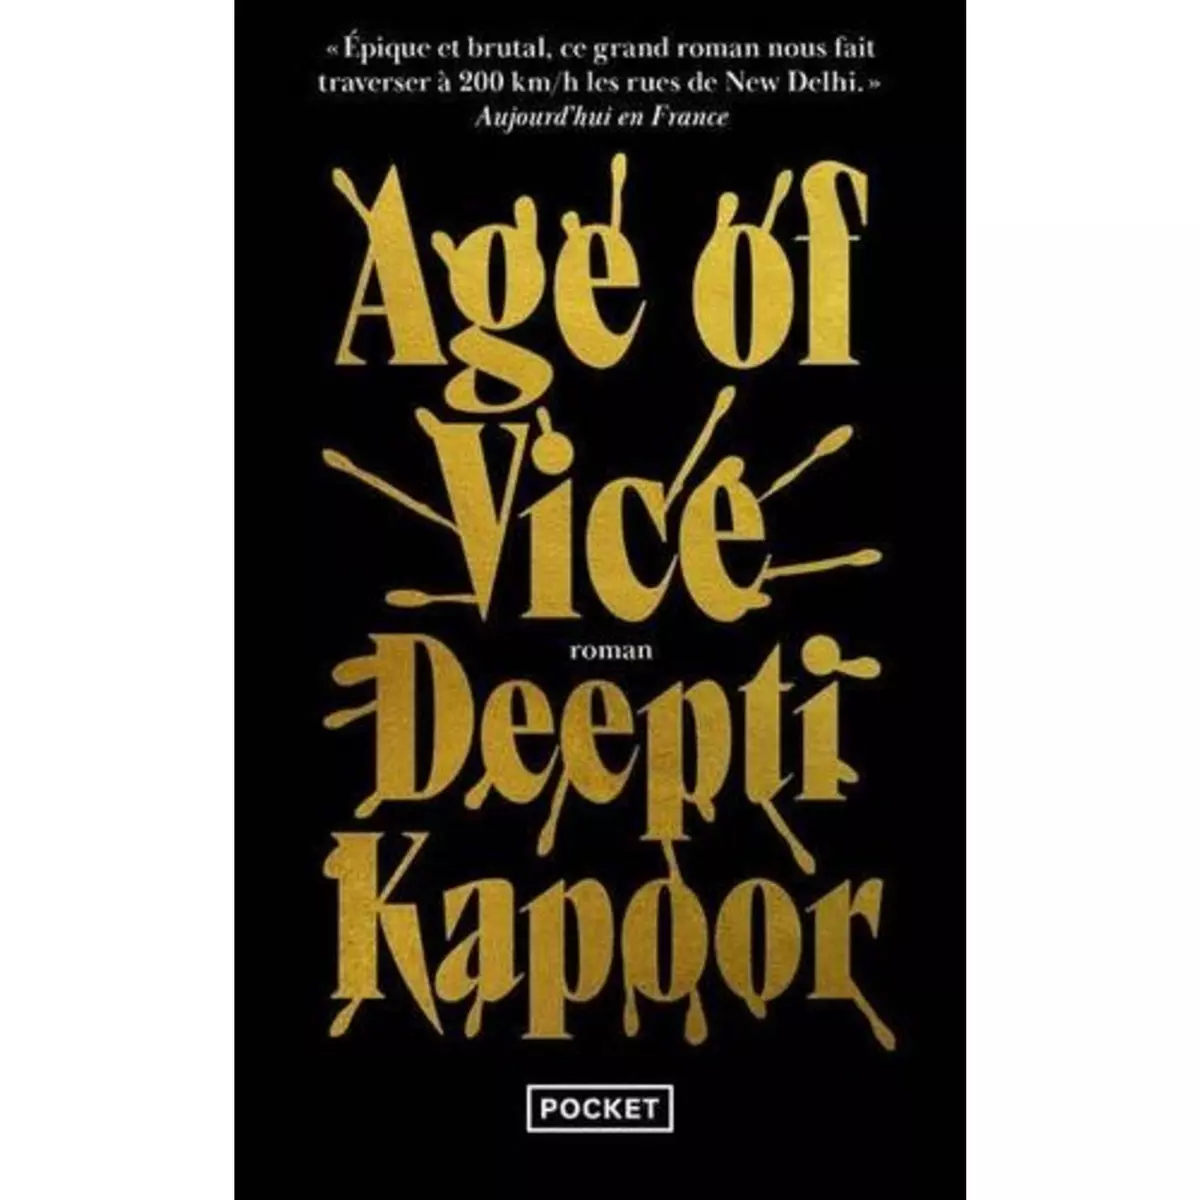  AGE OF VICE, Kapoor Deepti